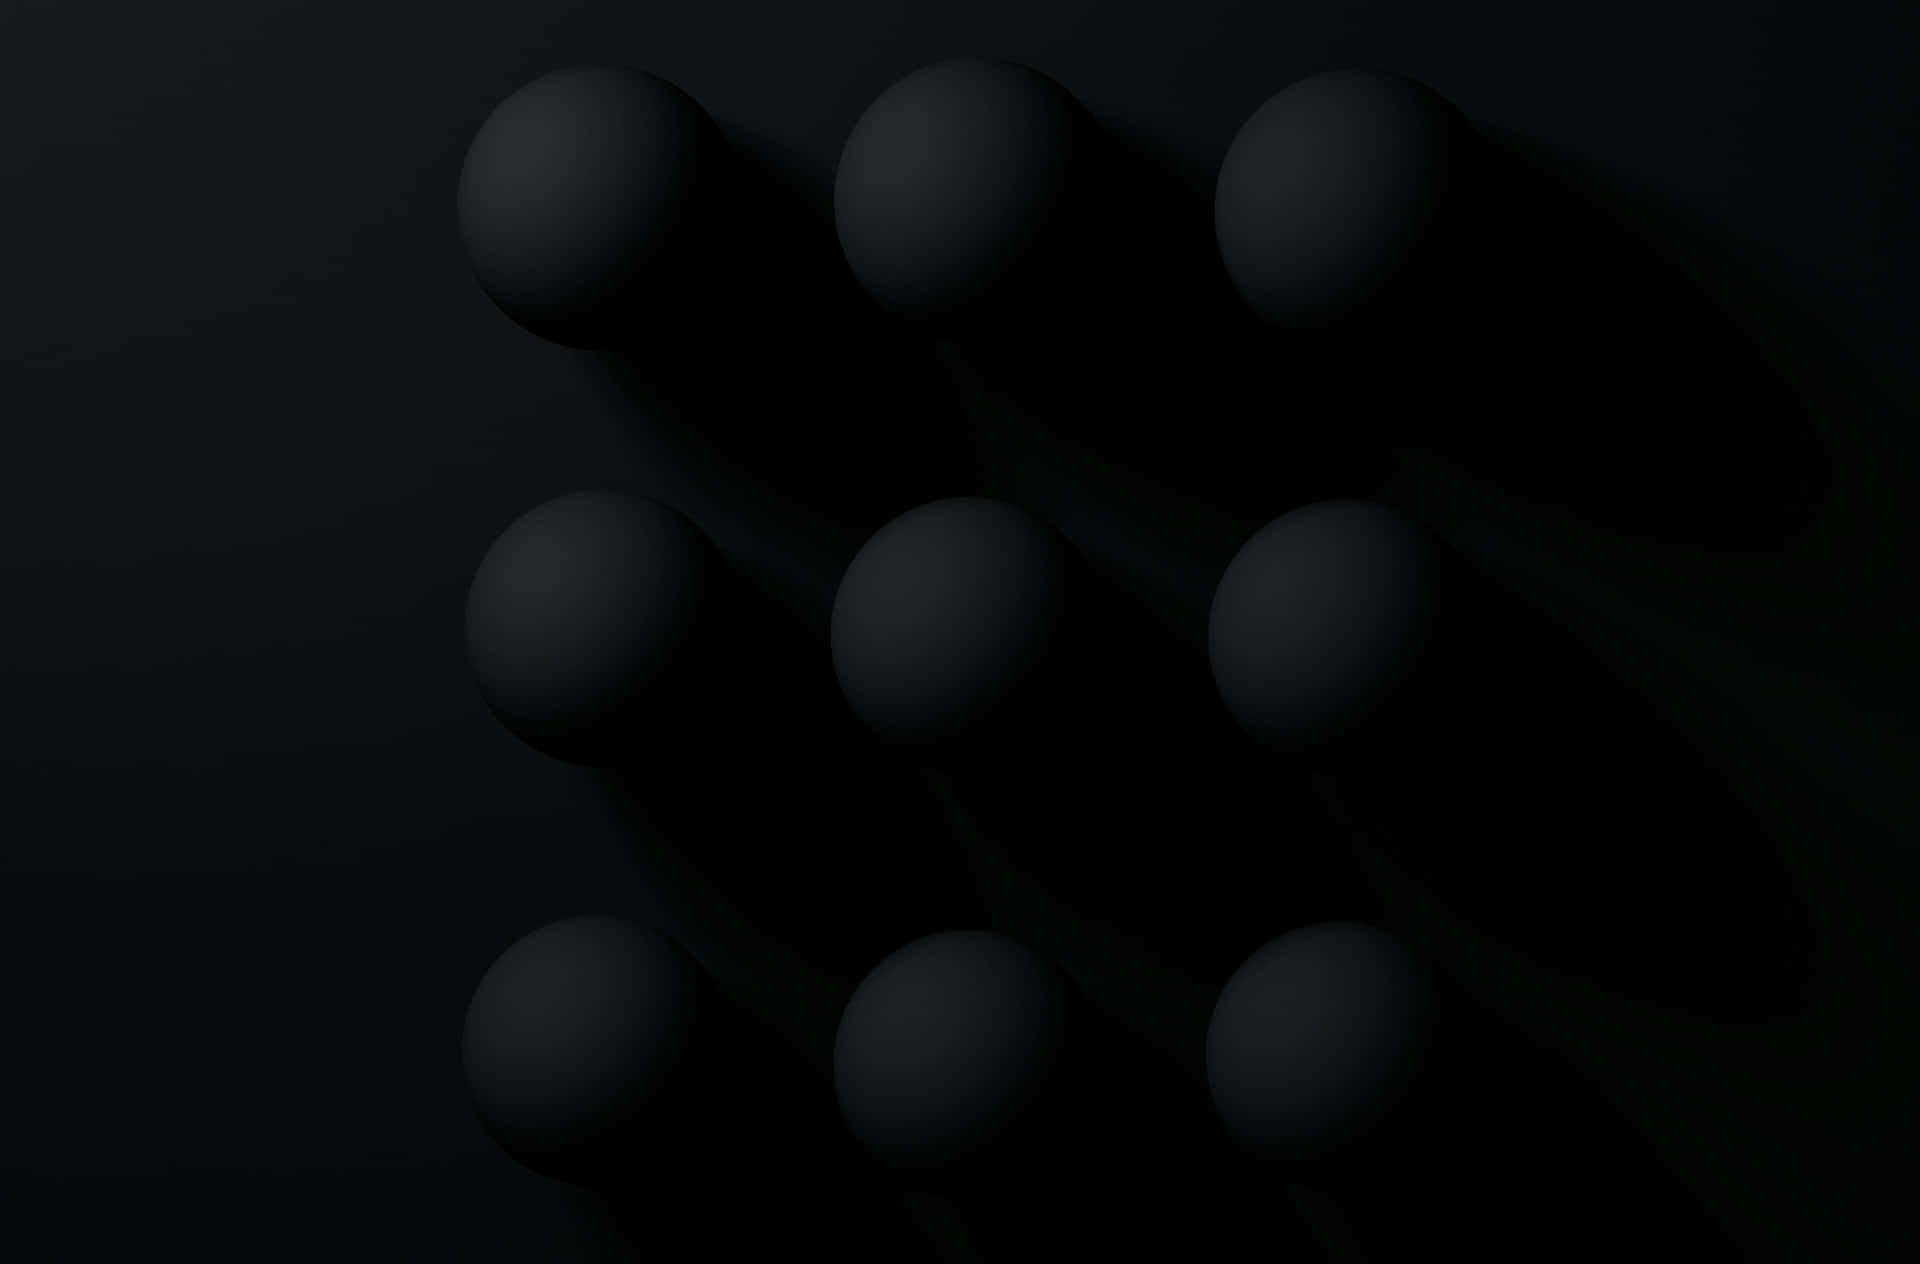 Abstract Black Spheres Shadow Wallpaper